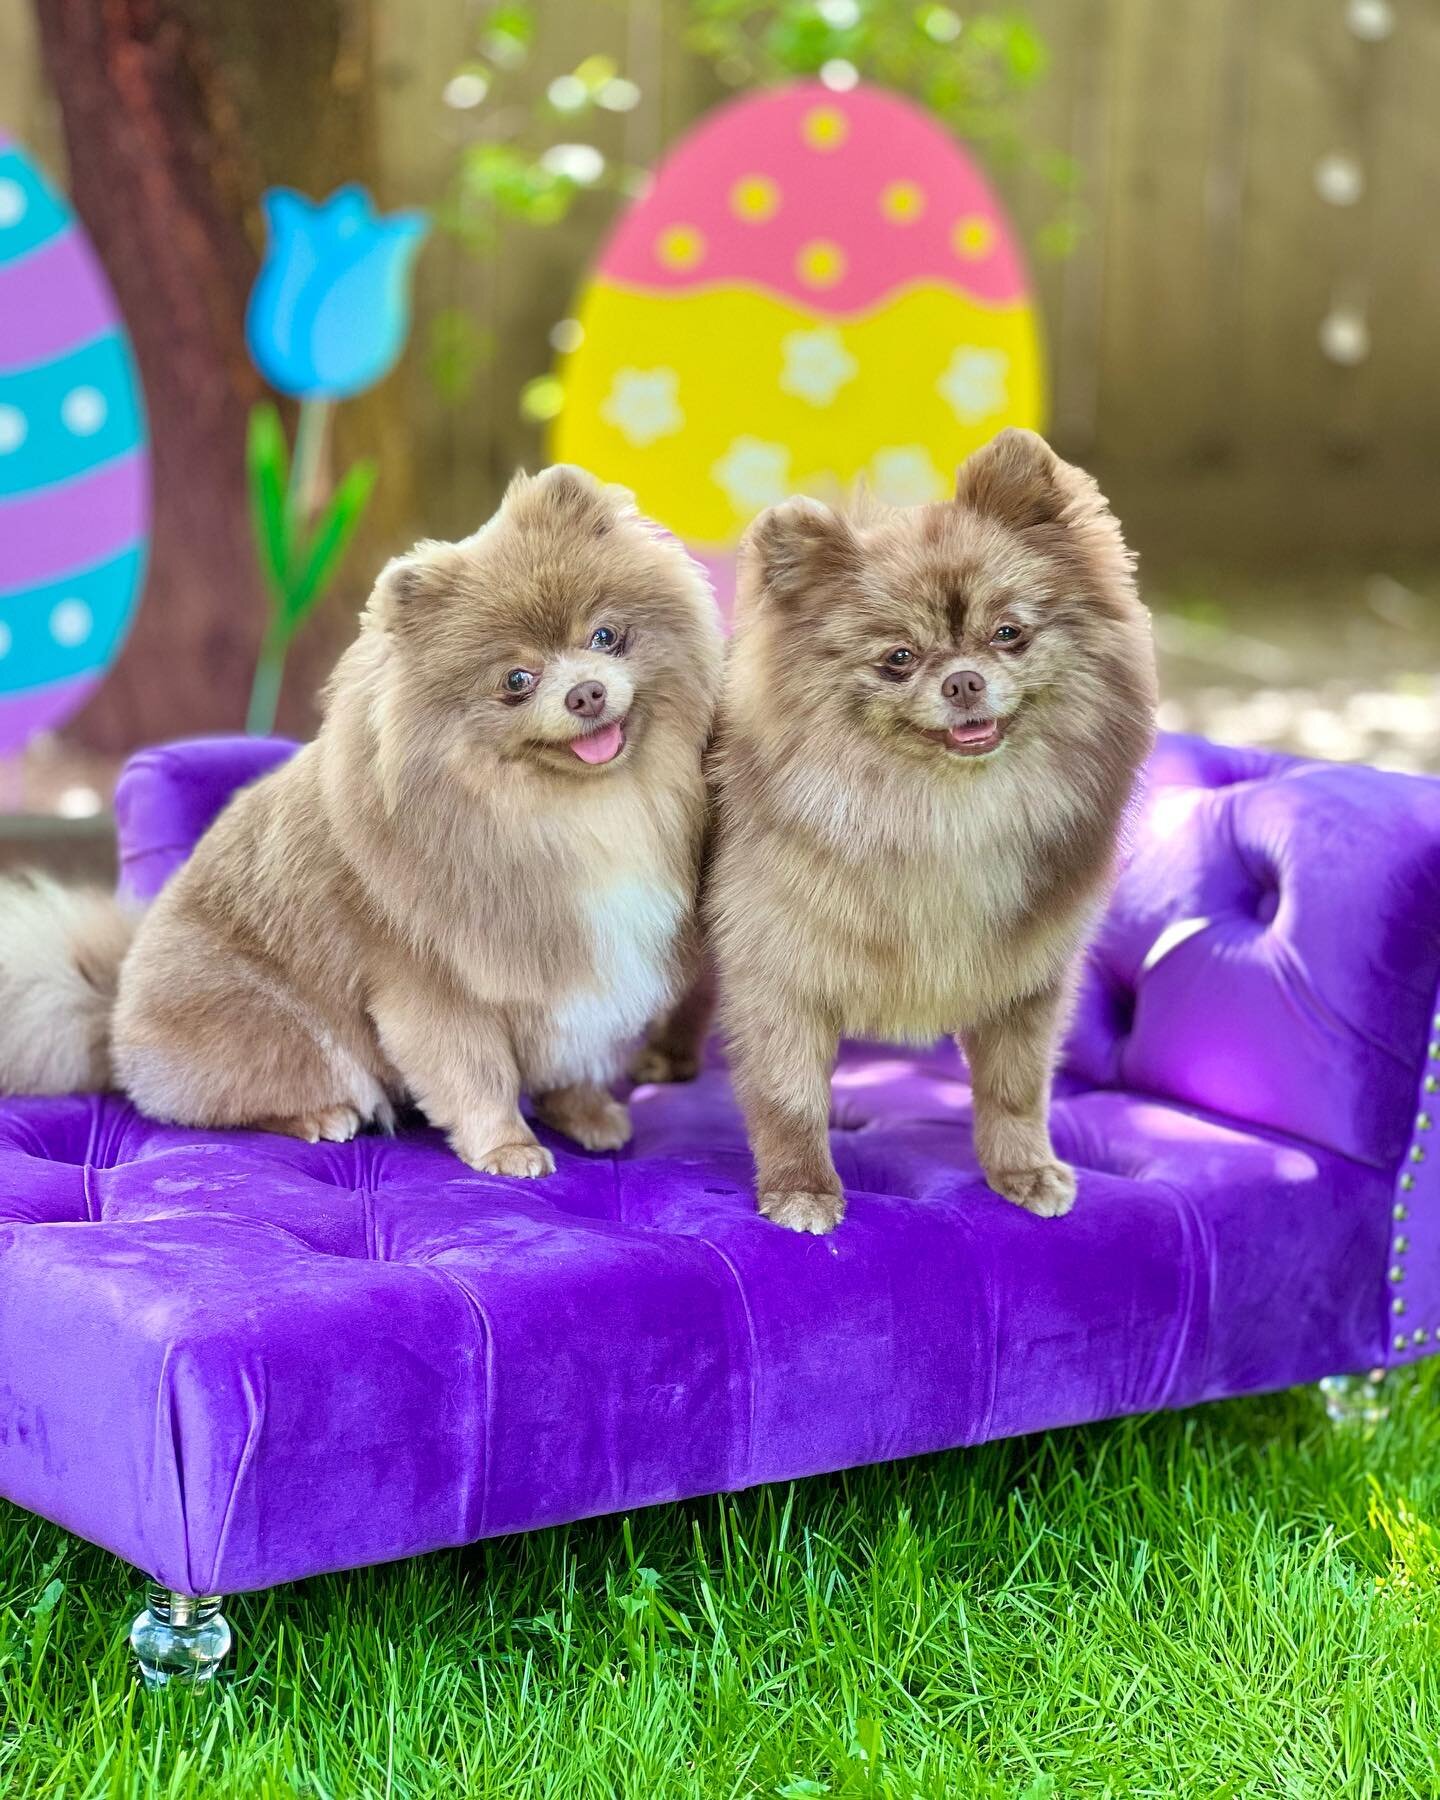 What&rsquo;s better than 1? 2! I said it many times before, and I&rsquo;ll say it again&hellip;. I LOVE ME A PAIR OF SISTERS 👯&zwj;♀️ Coka&rsquo; and Isabella
@rayofpoms My newest partner in Joy, puppy making, laughter, and goal setting&hellip; I kn